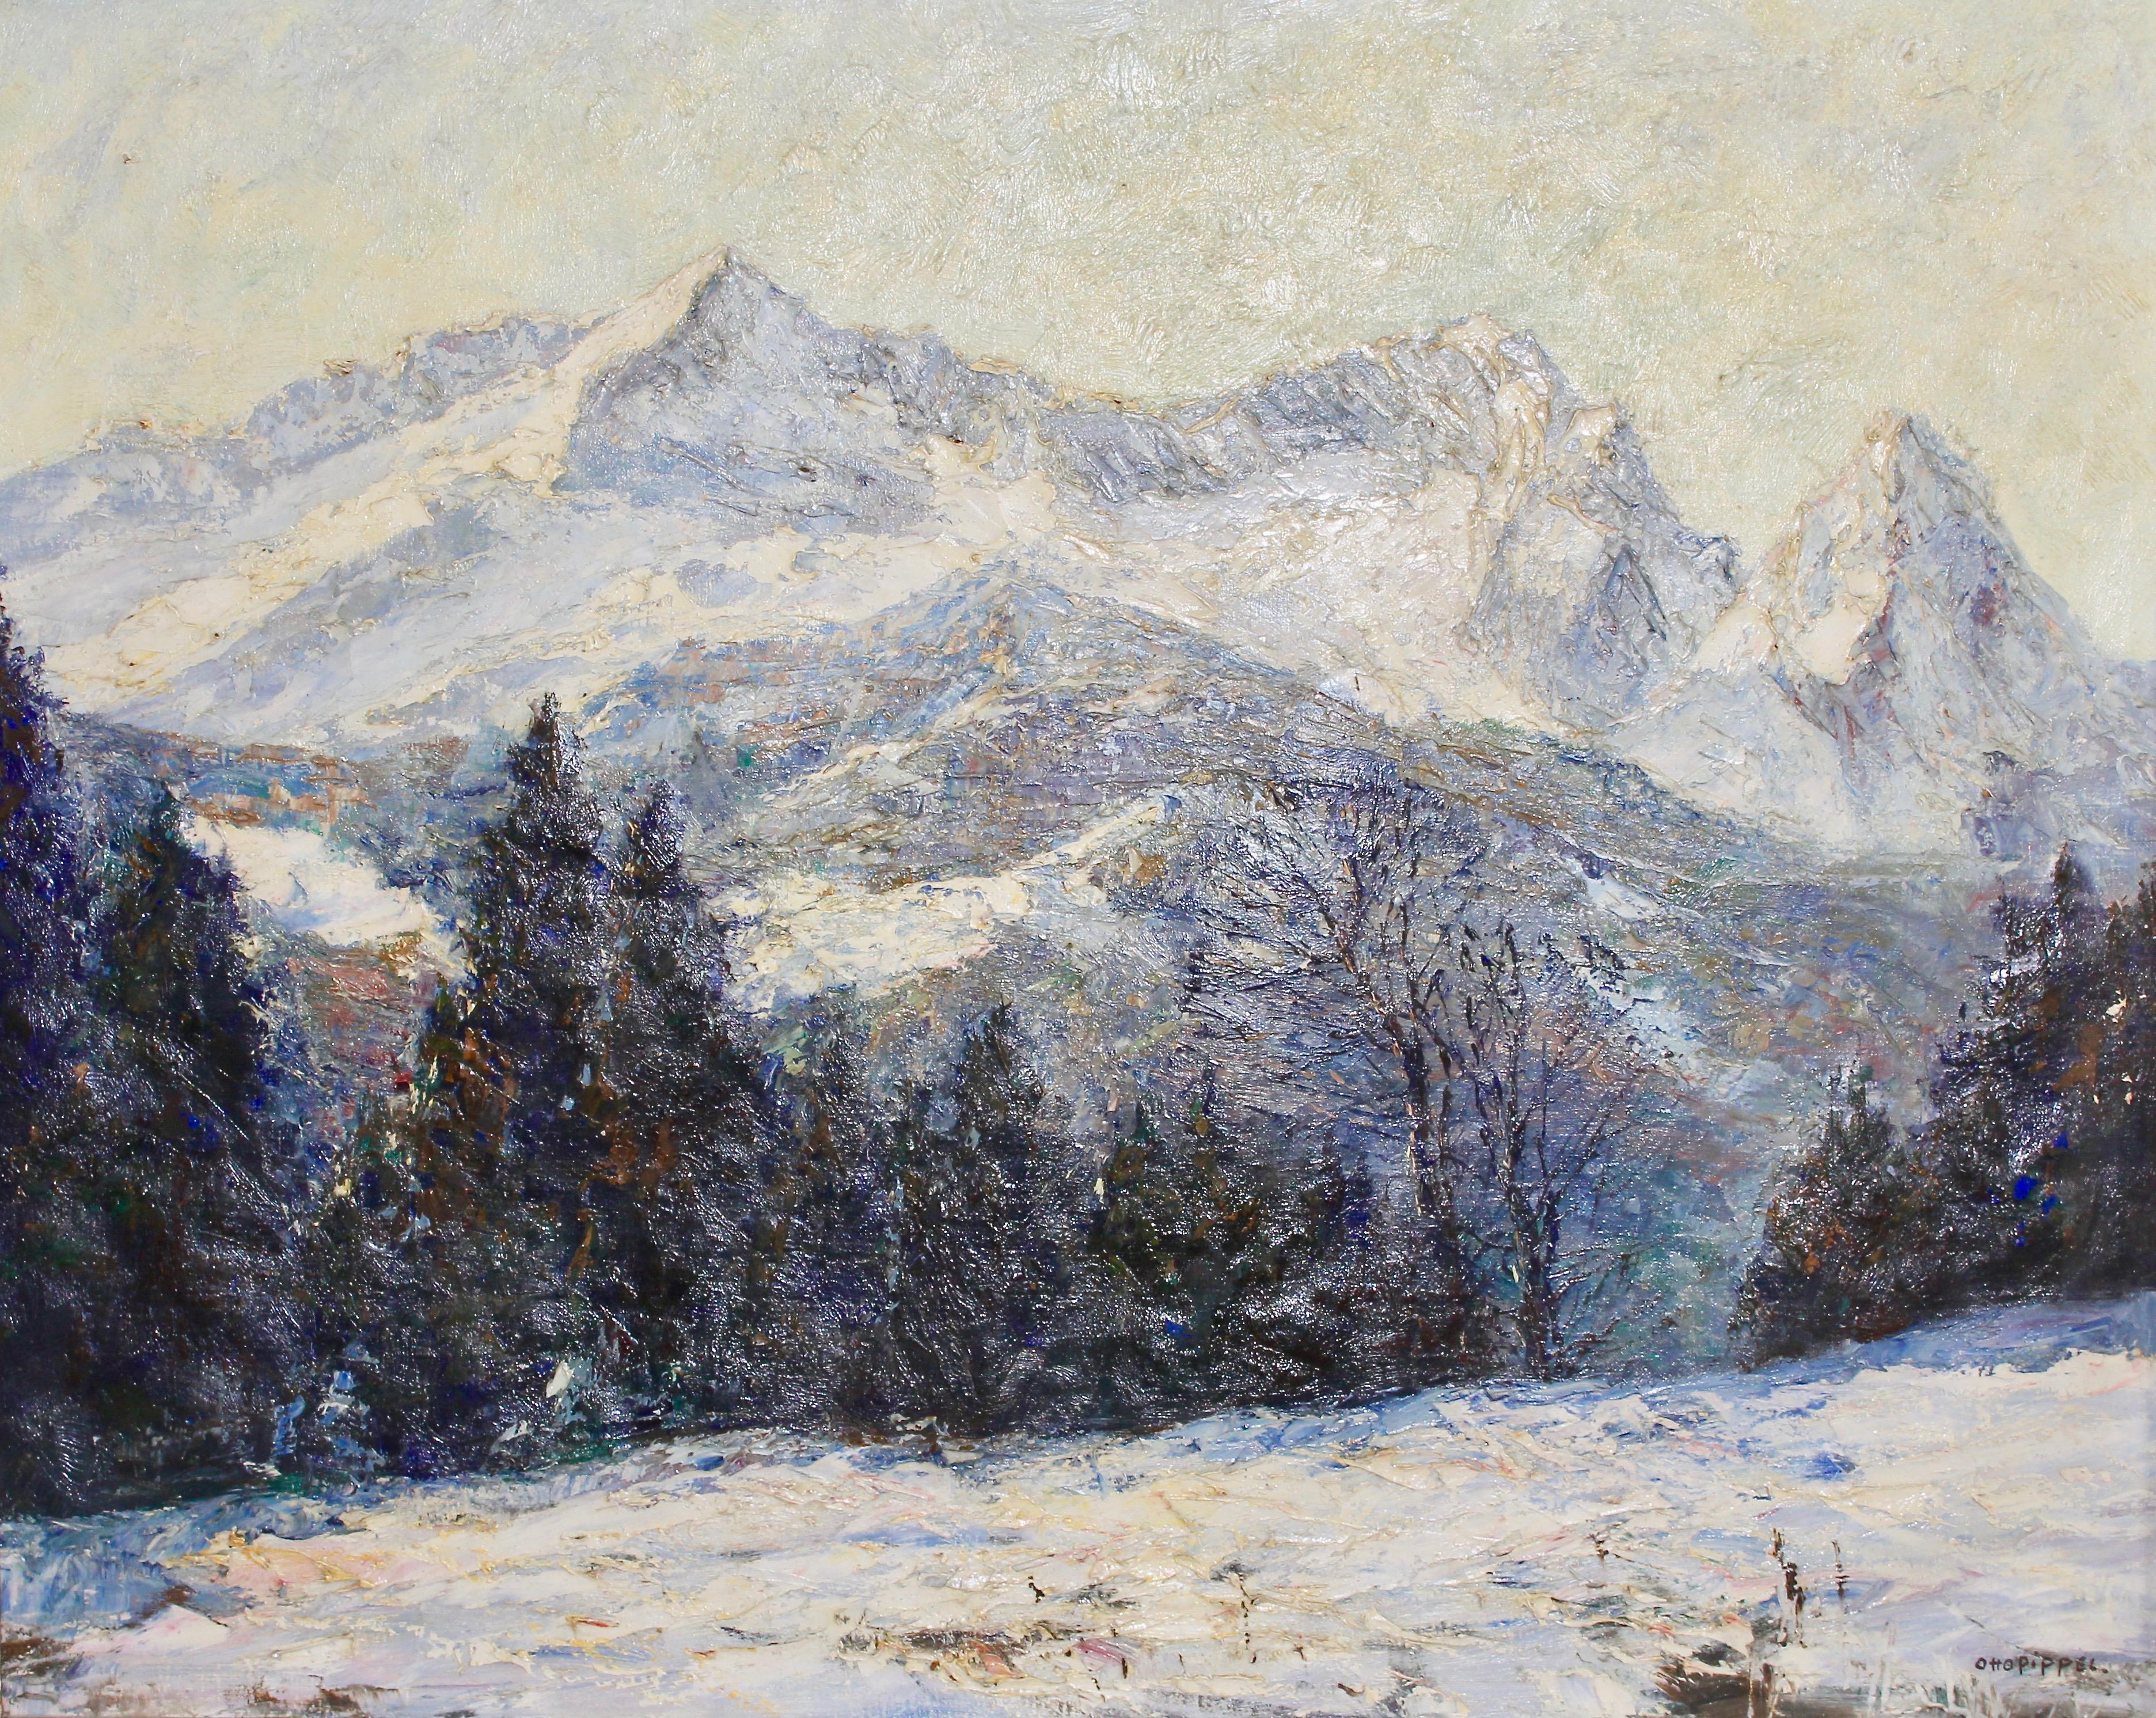 Otto Pippel Landscape Painting - Antique Painting, Oil on canvas, Winter Morning in the Alps Mountains, Zugspitze